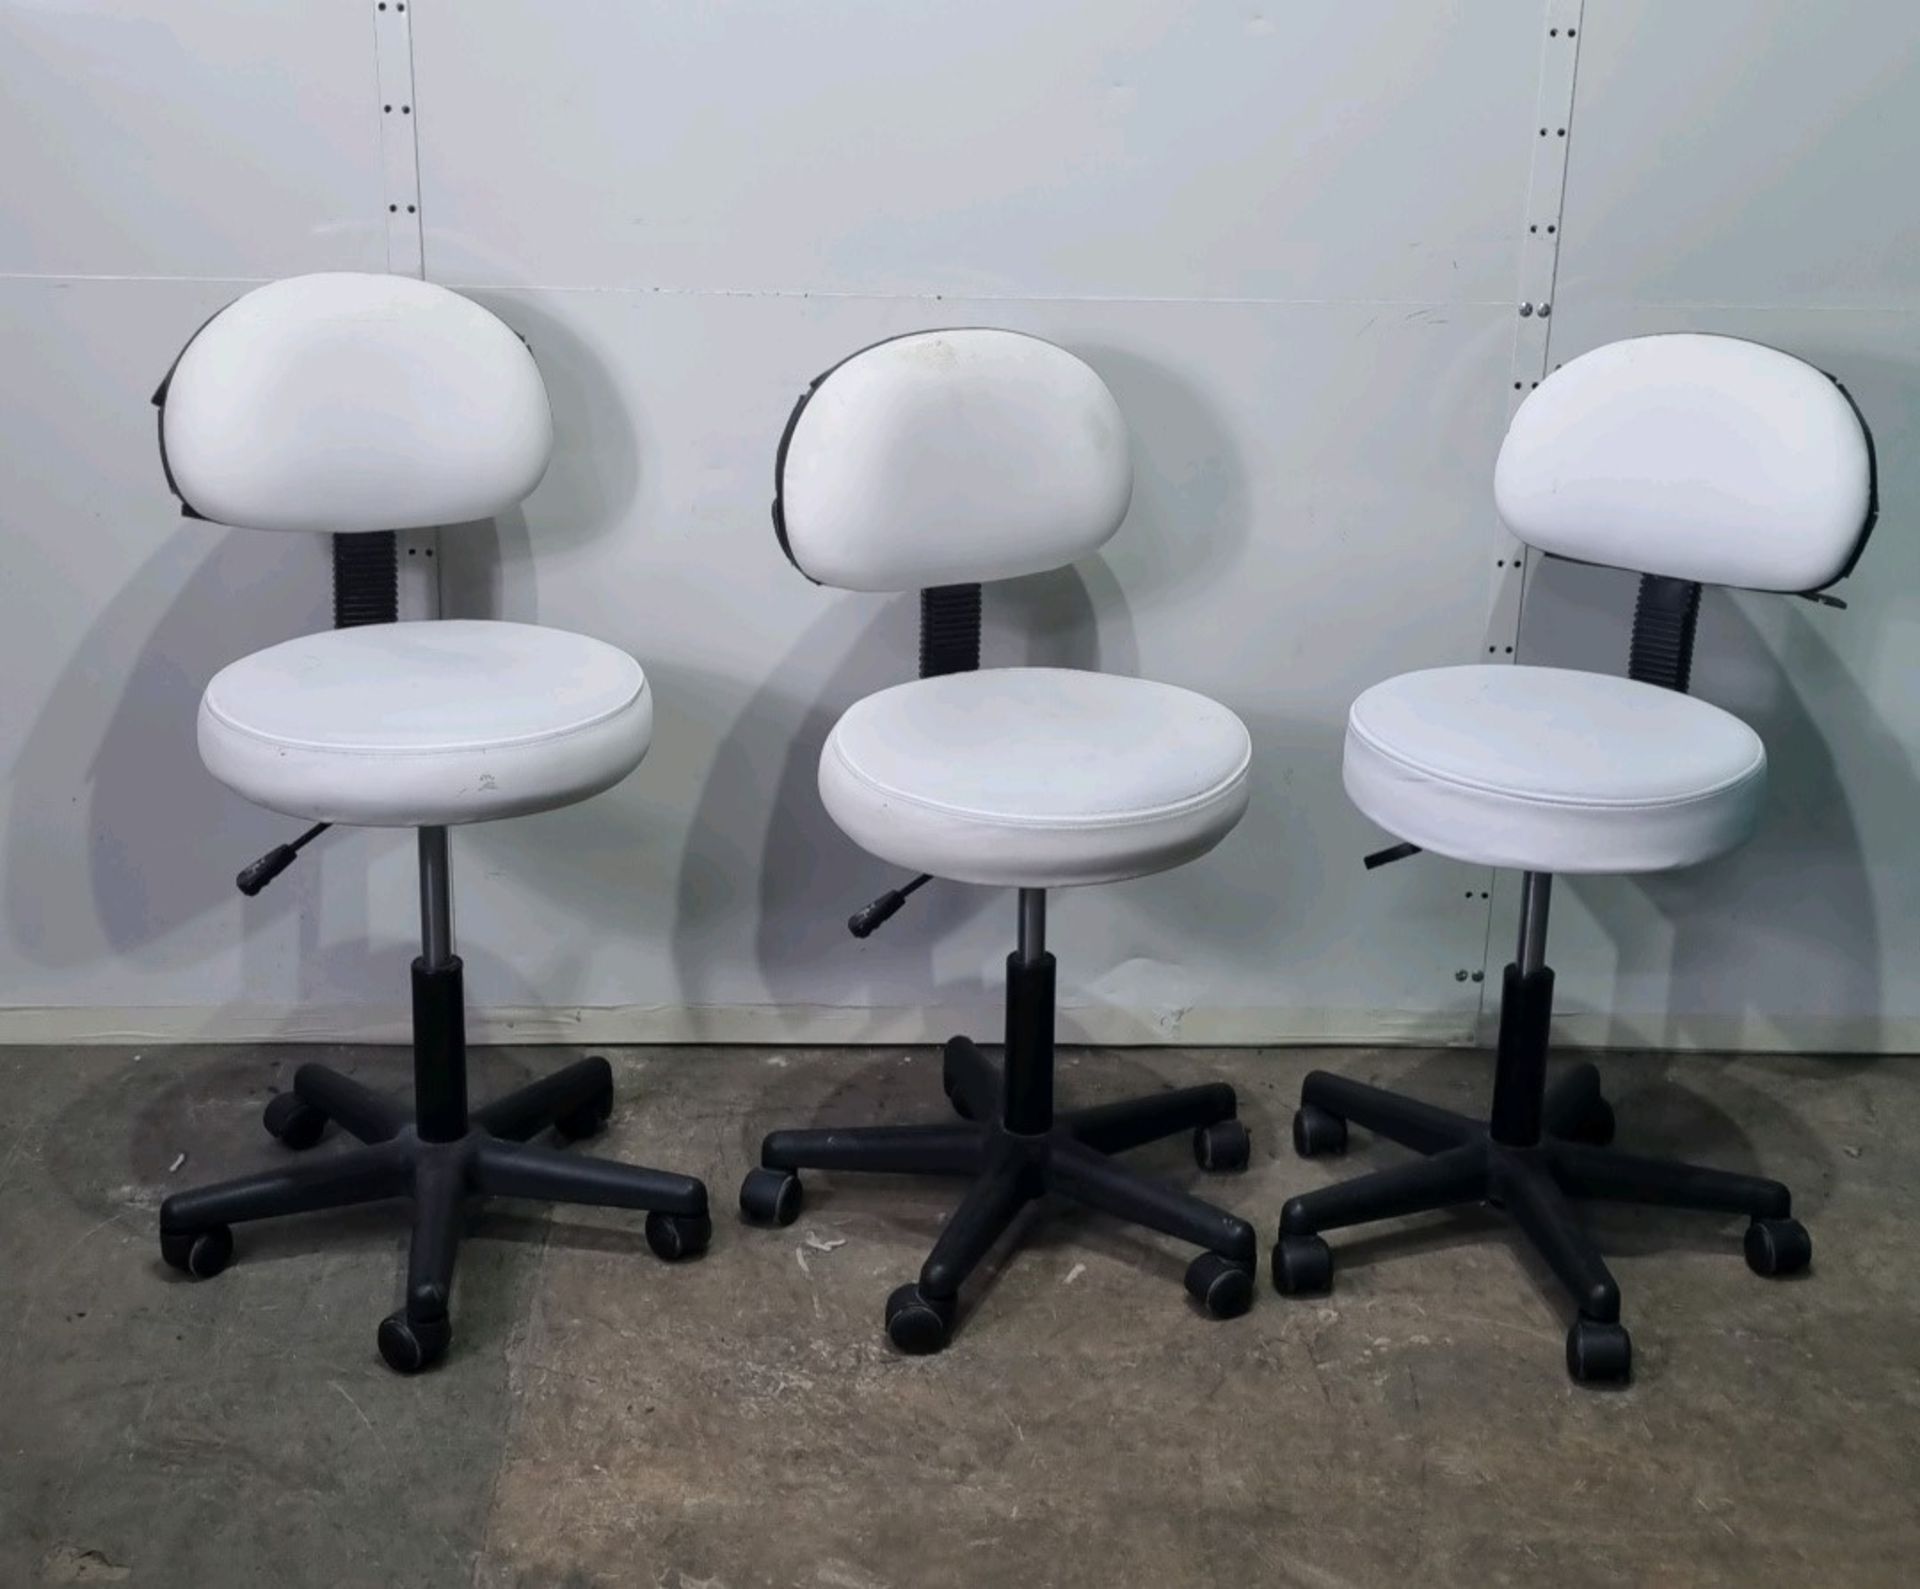 3 x Leather Effect Adjustable Swivel Chairs